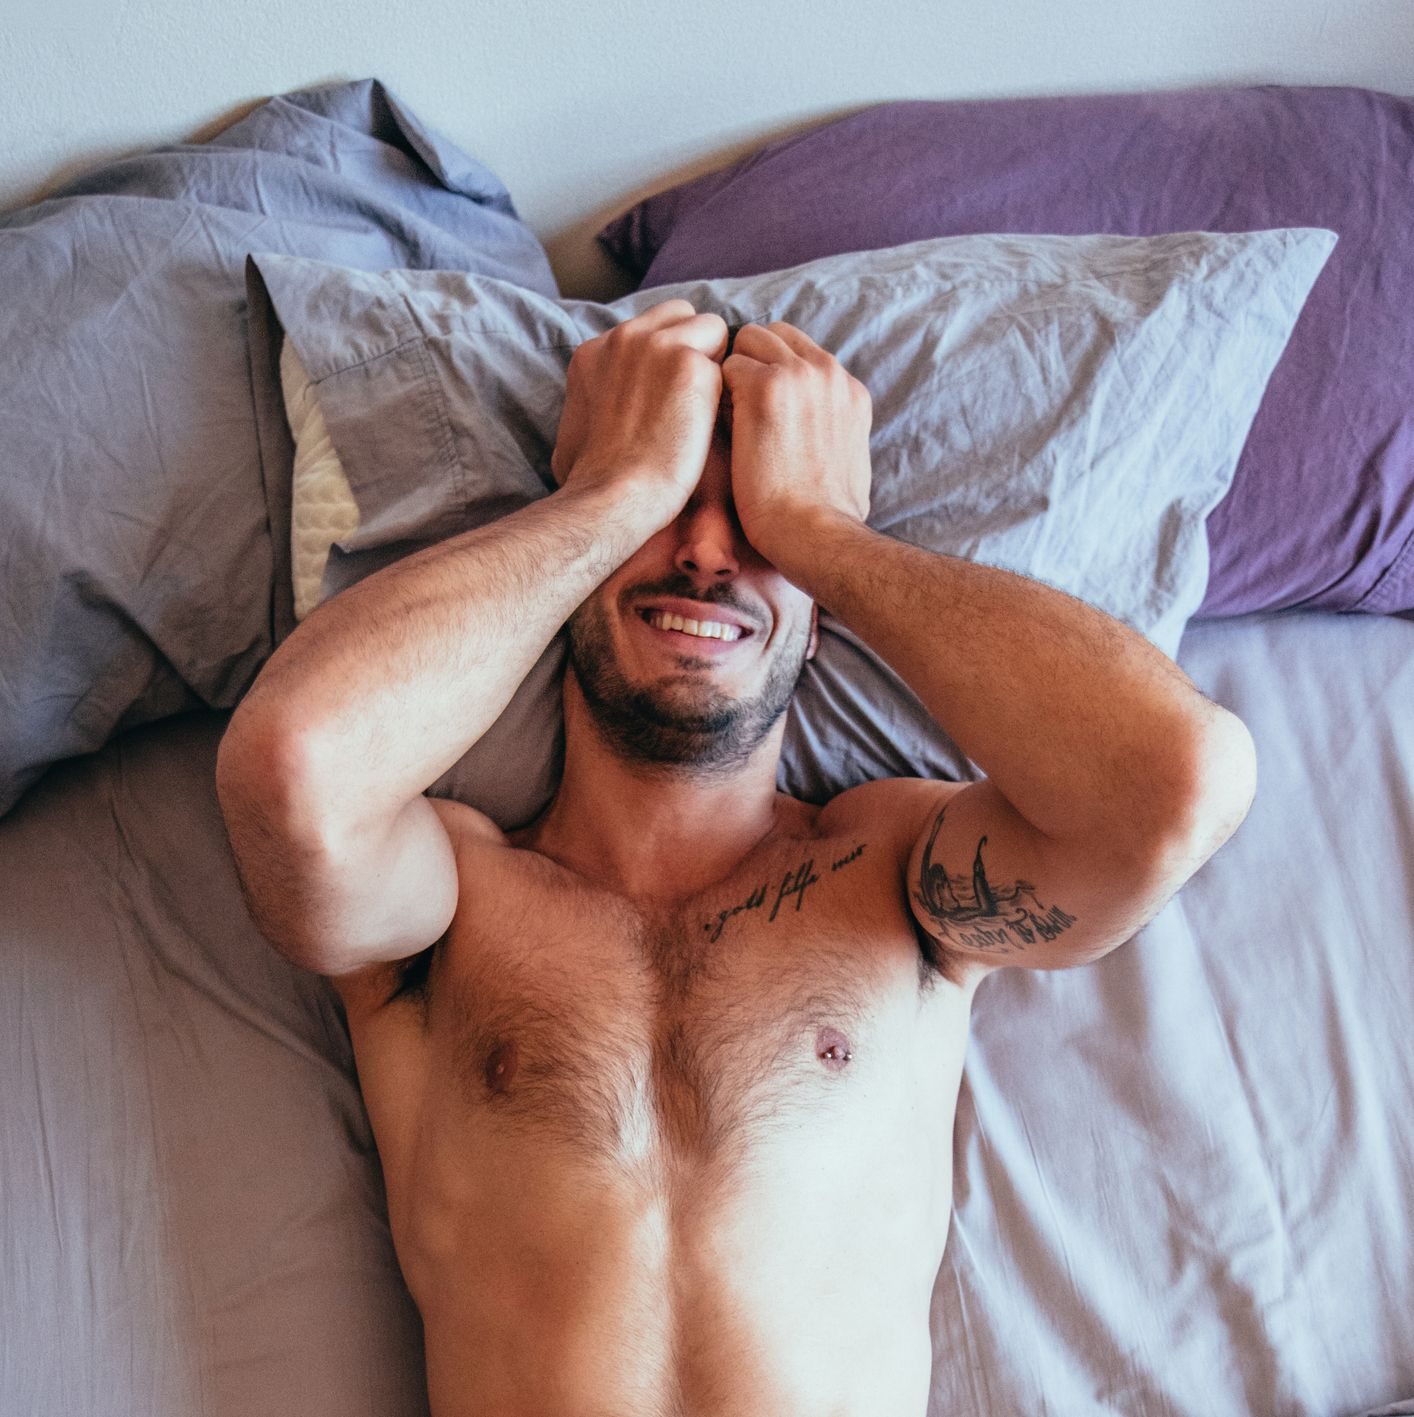 7 Ways to Cope With Sexual Frustration